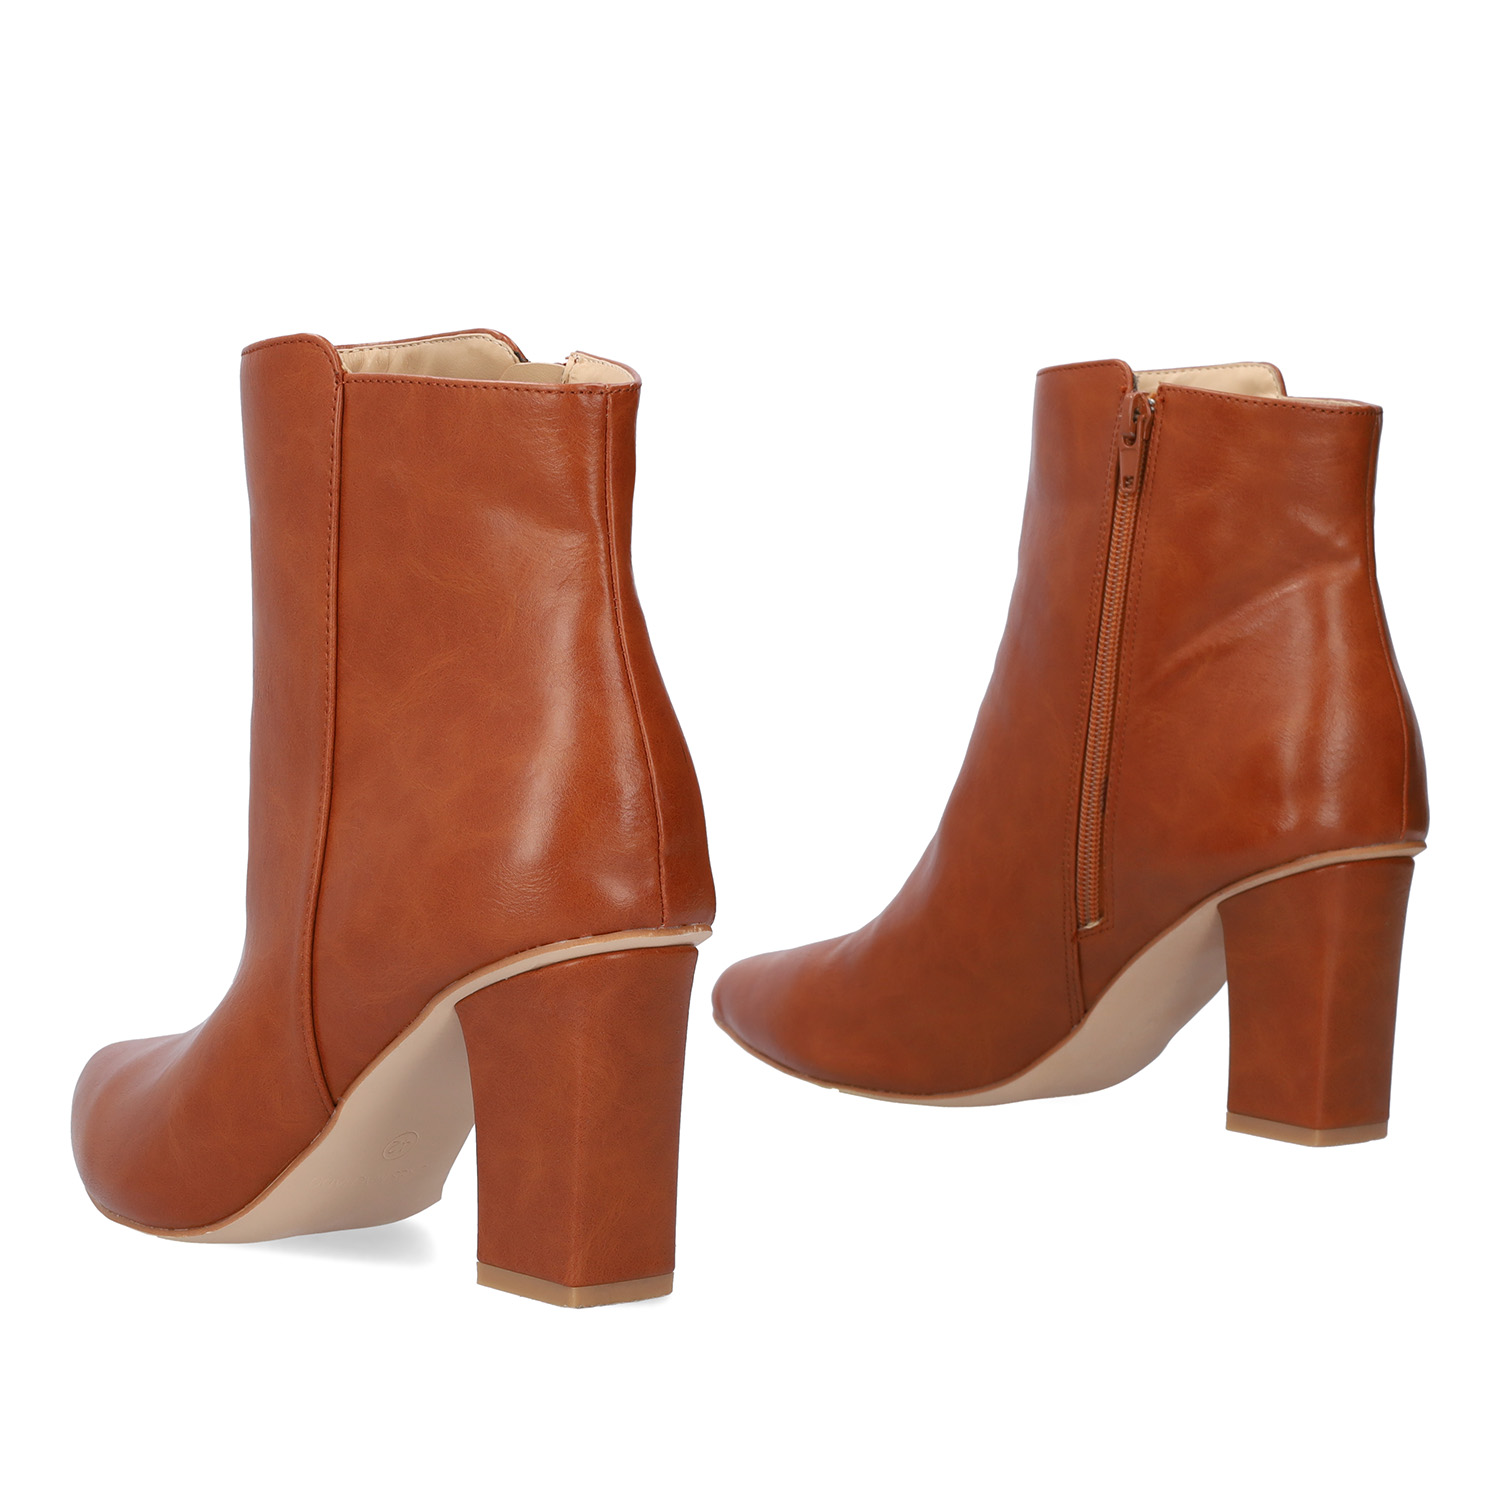 Heeled booties in brown faux leather. 